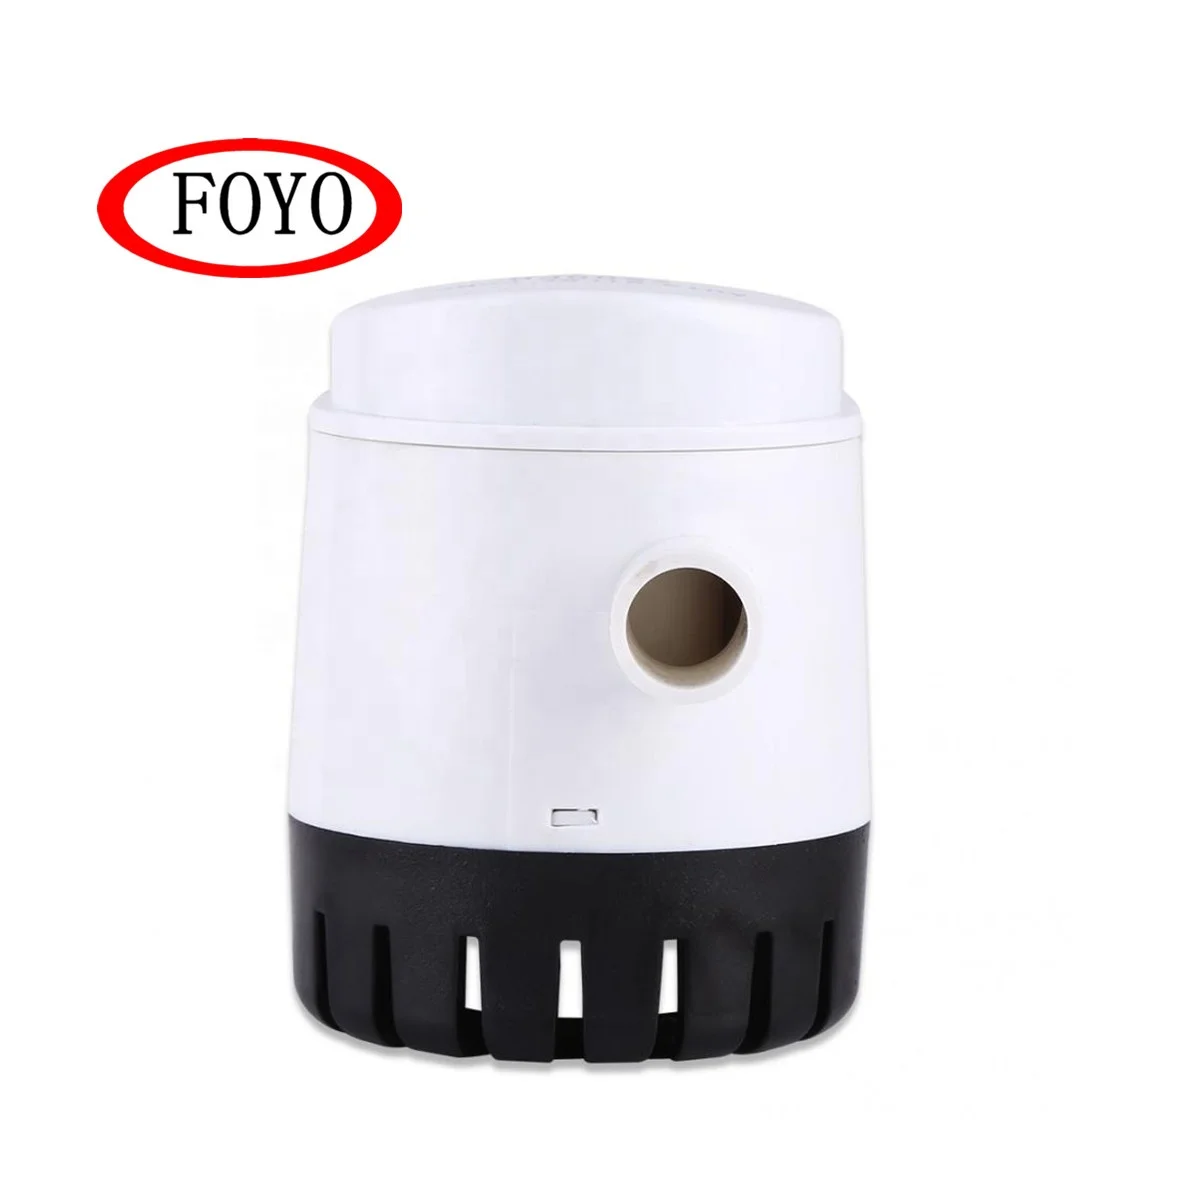 
Foyo Brand Cheap Price Marine 24v 1100GPH Automatic Submersible Boat Bilge Water Pumps for Ponds and Pools and Boat and Yacht 